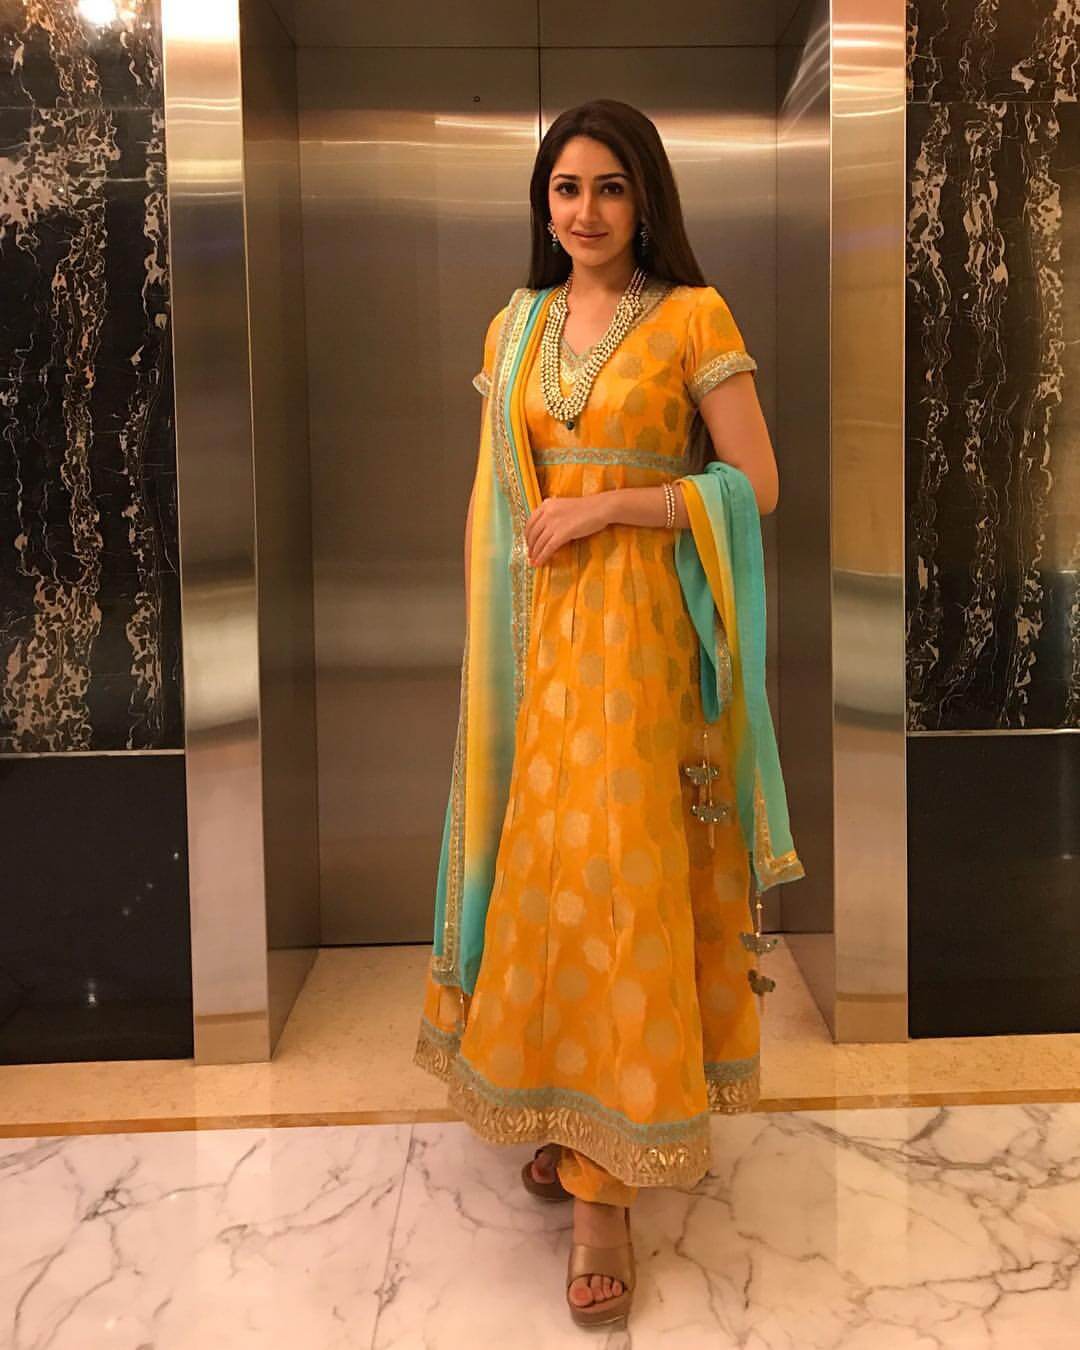 Sayyeshaa In Yellow Anarkali Suit Outfit Sayyeshaa Outfit, Style And Fashion For Stunning Look